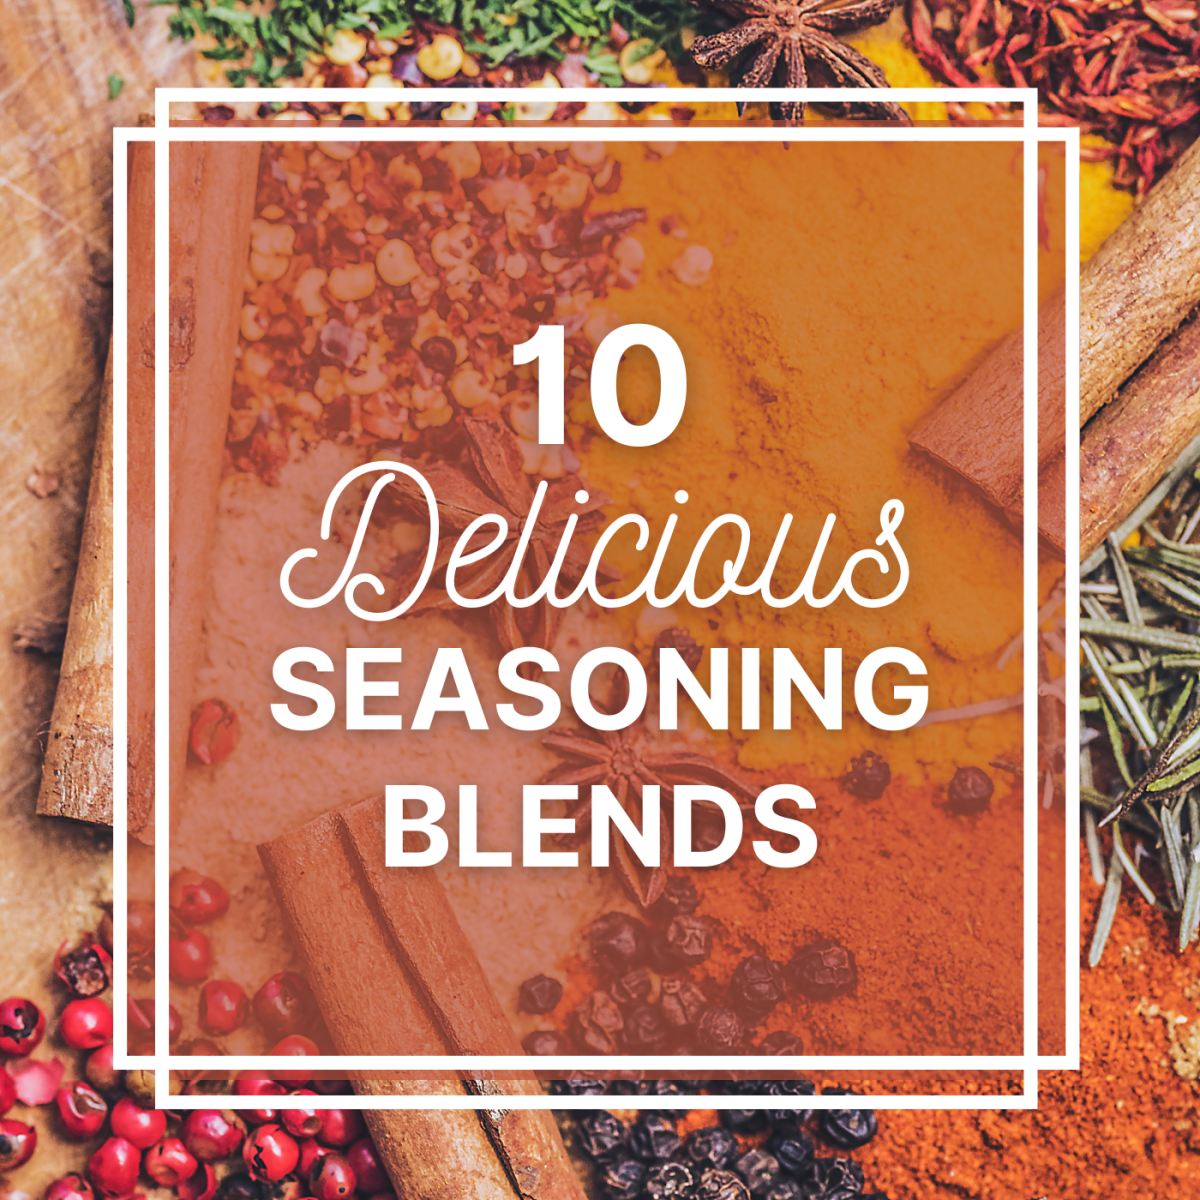 10 Great Seasoning Blends You Can Make at Home